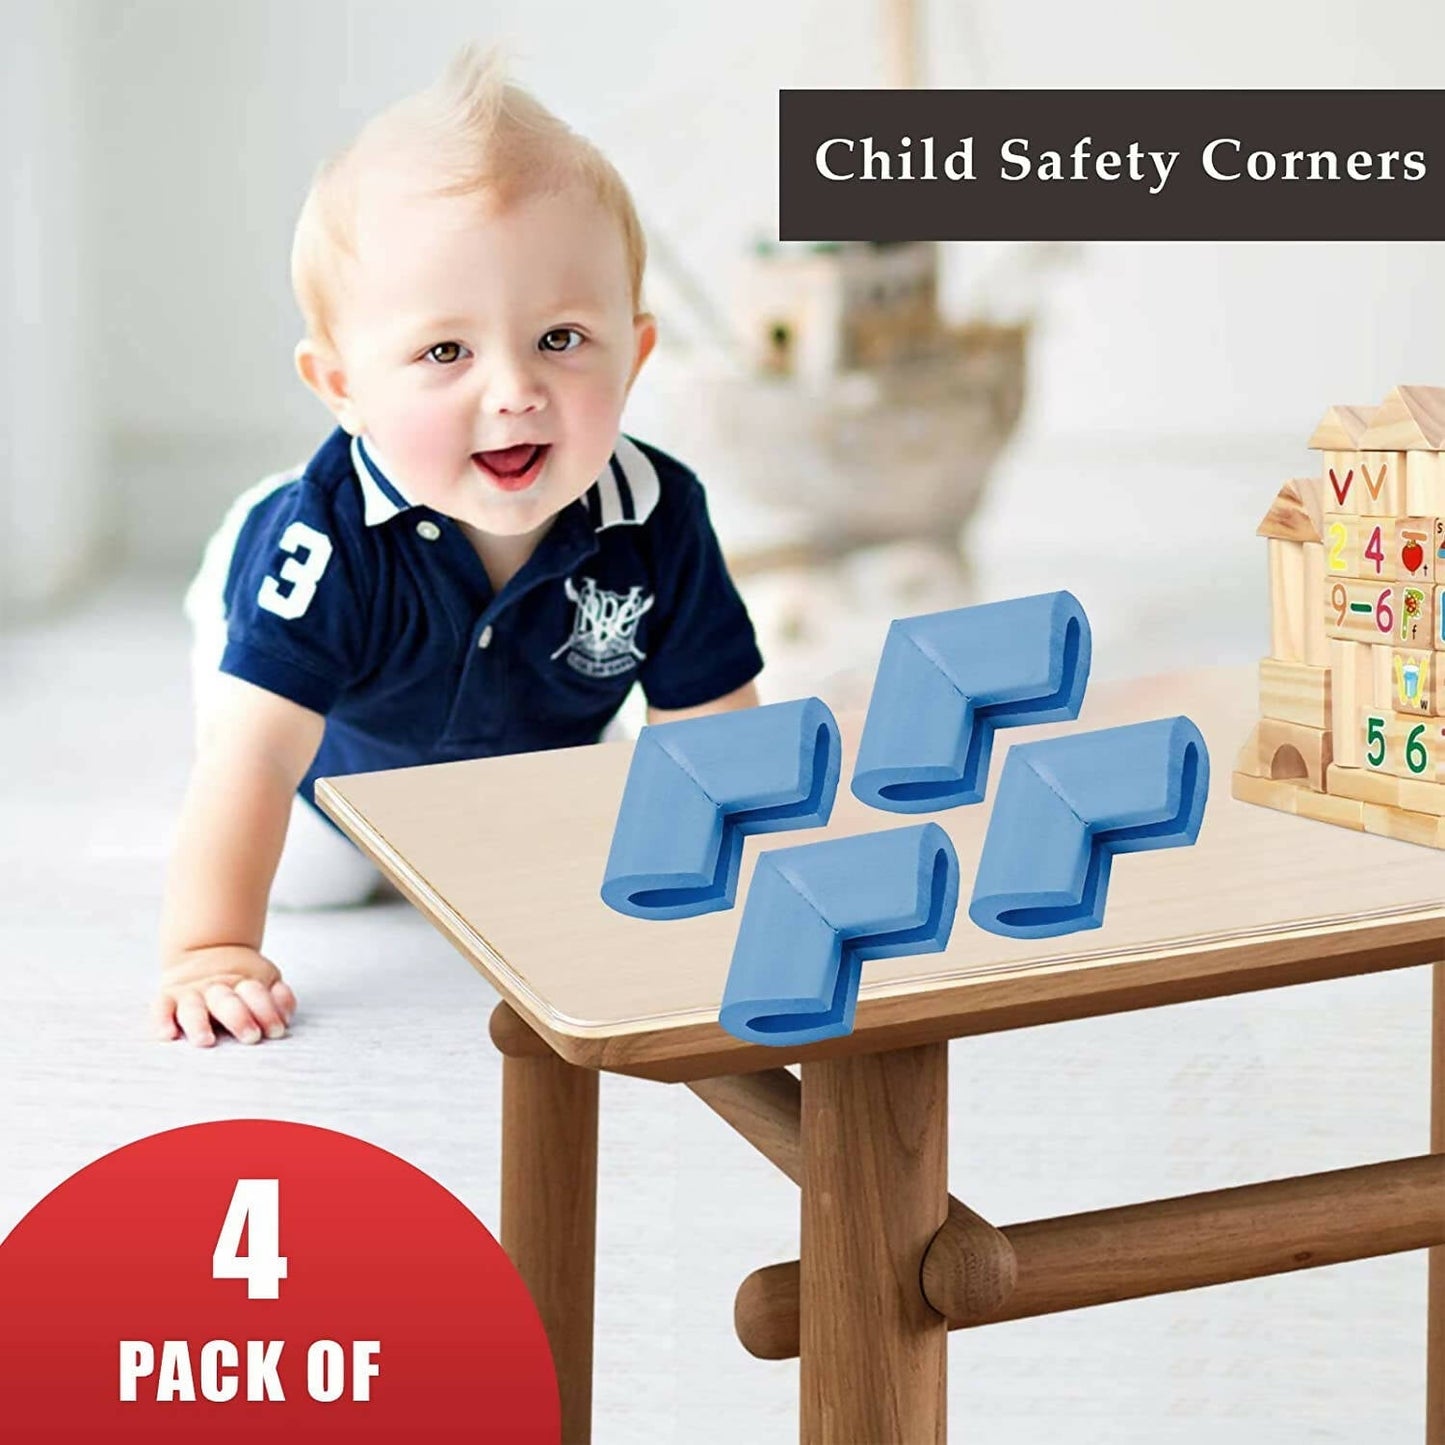 Safe-O-Kid Corner Guards Cushions L Shaped, Small, Blue For Kids Protection